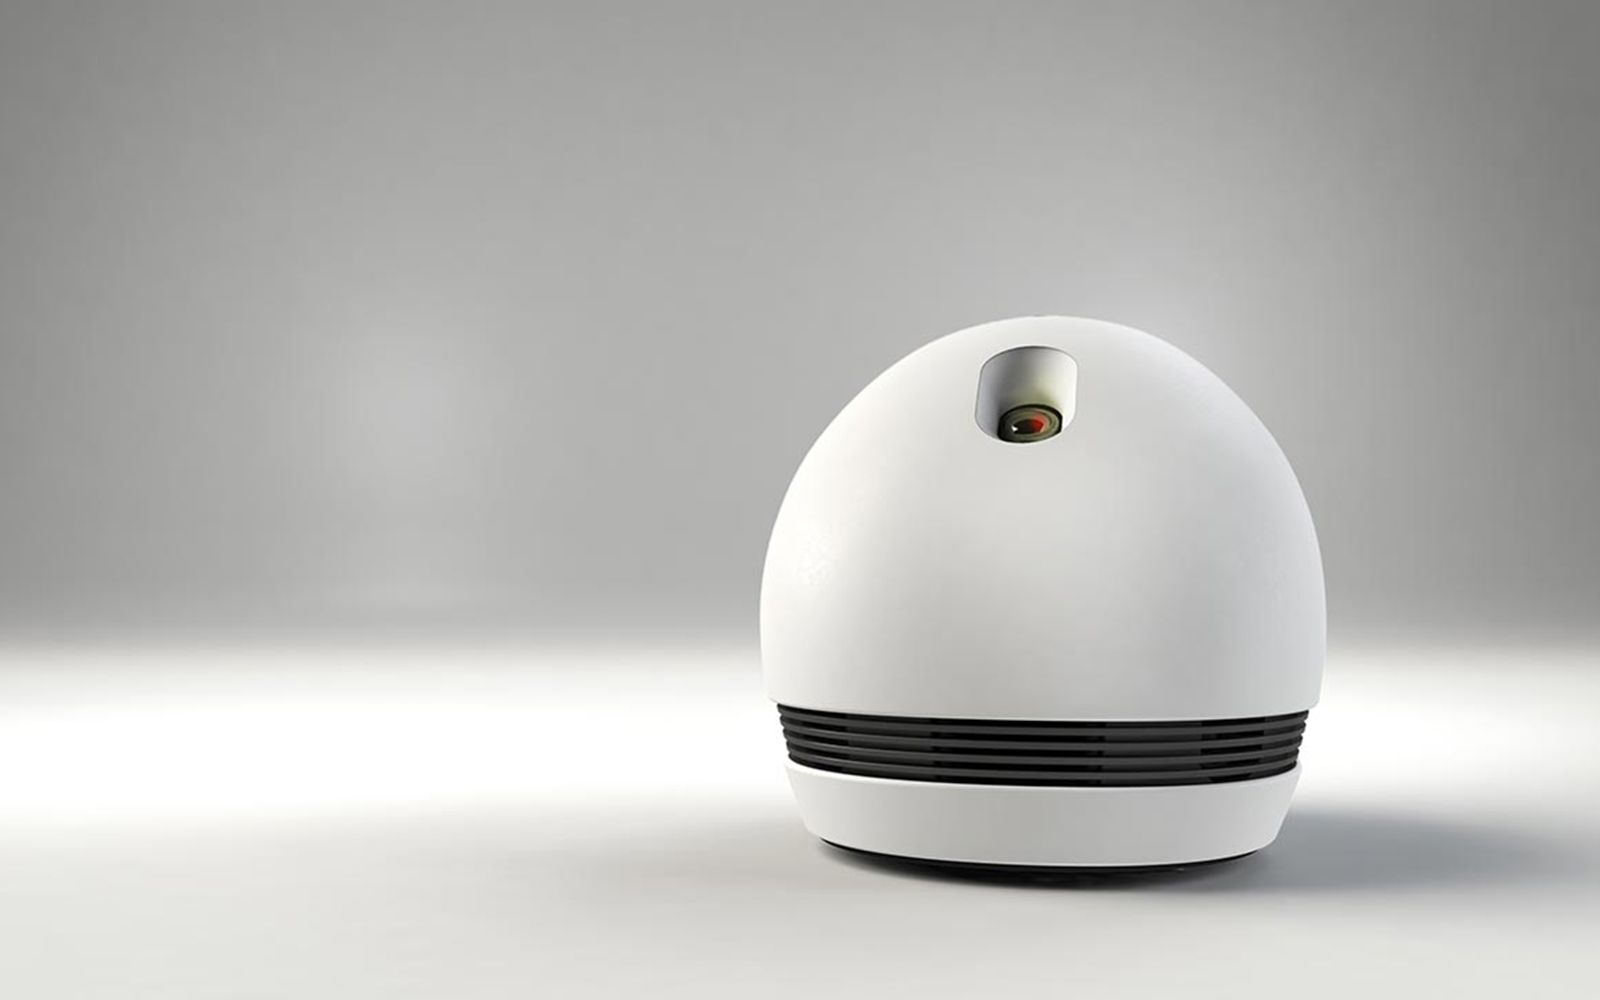 keeker is the smart robot for the home a moving projector speaker security bot and more image 1